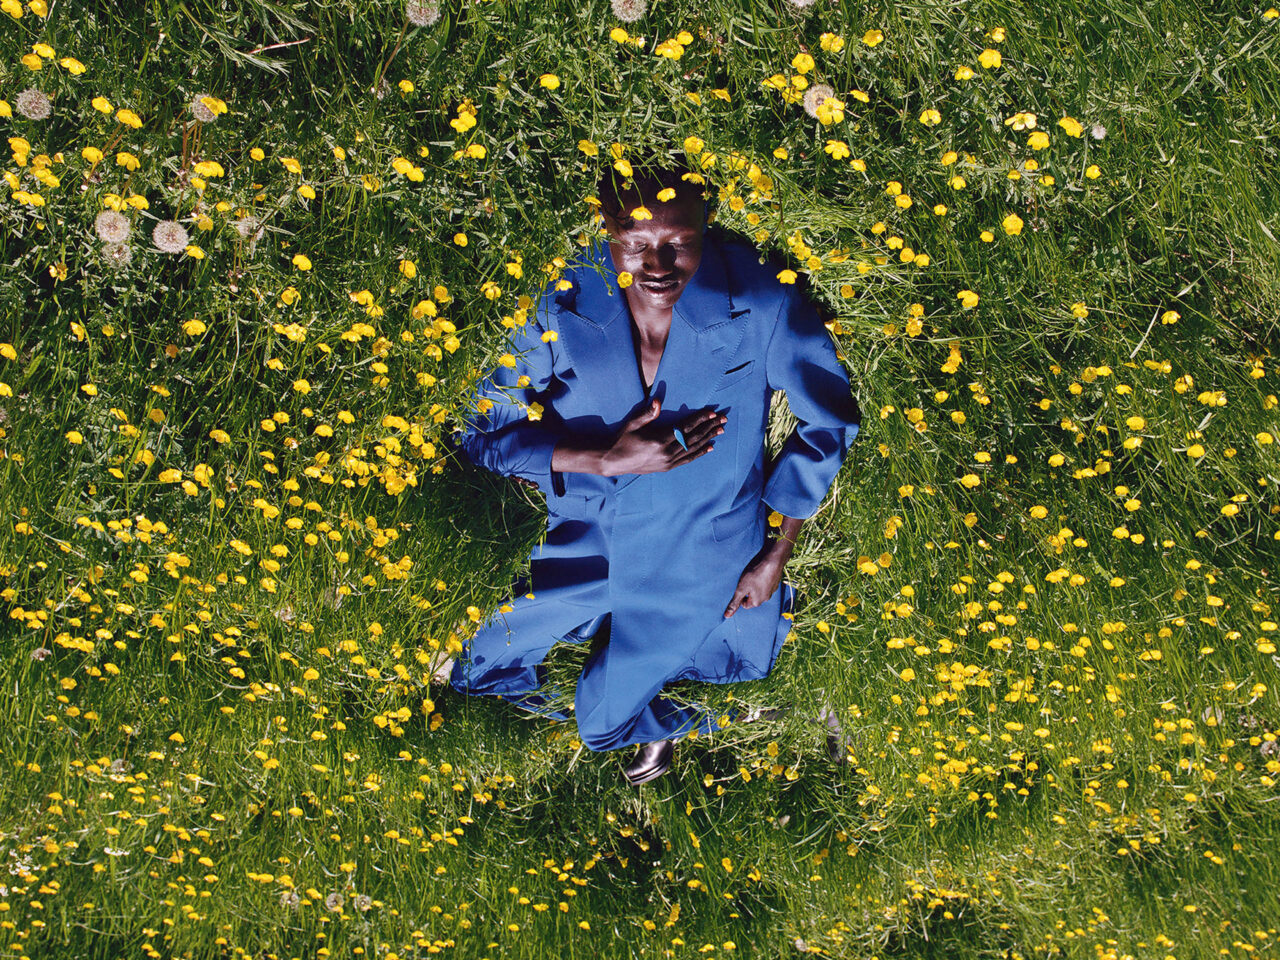 A model wearing a blue outfit on the green grass with yellow flowers